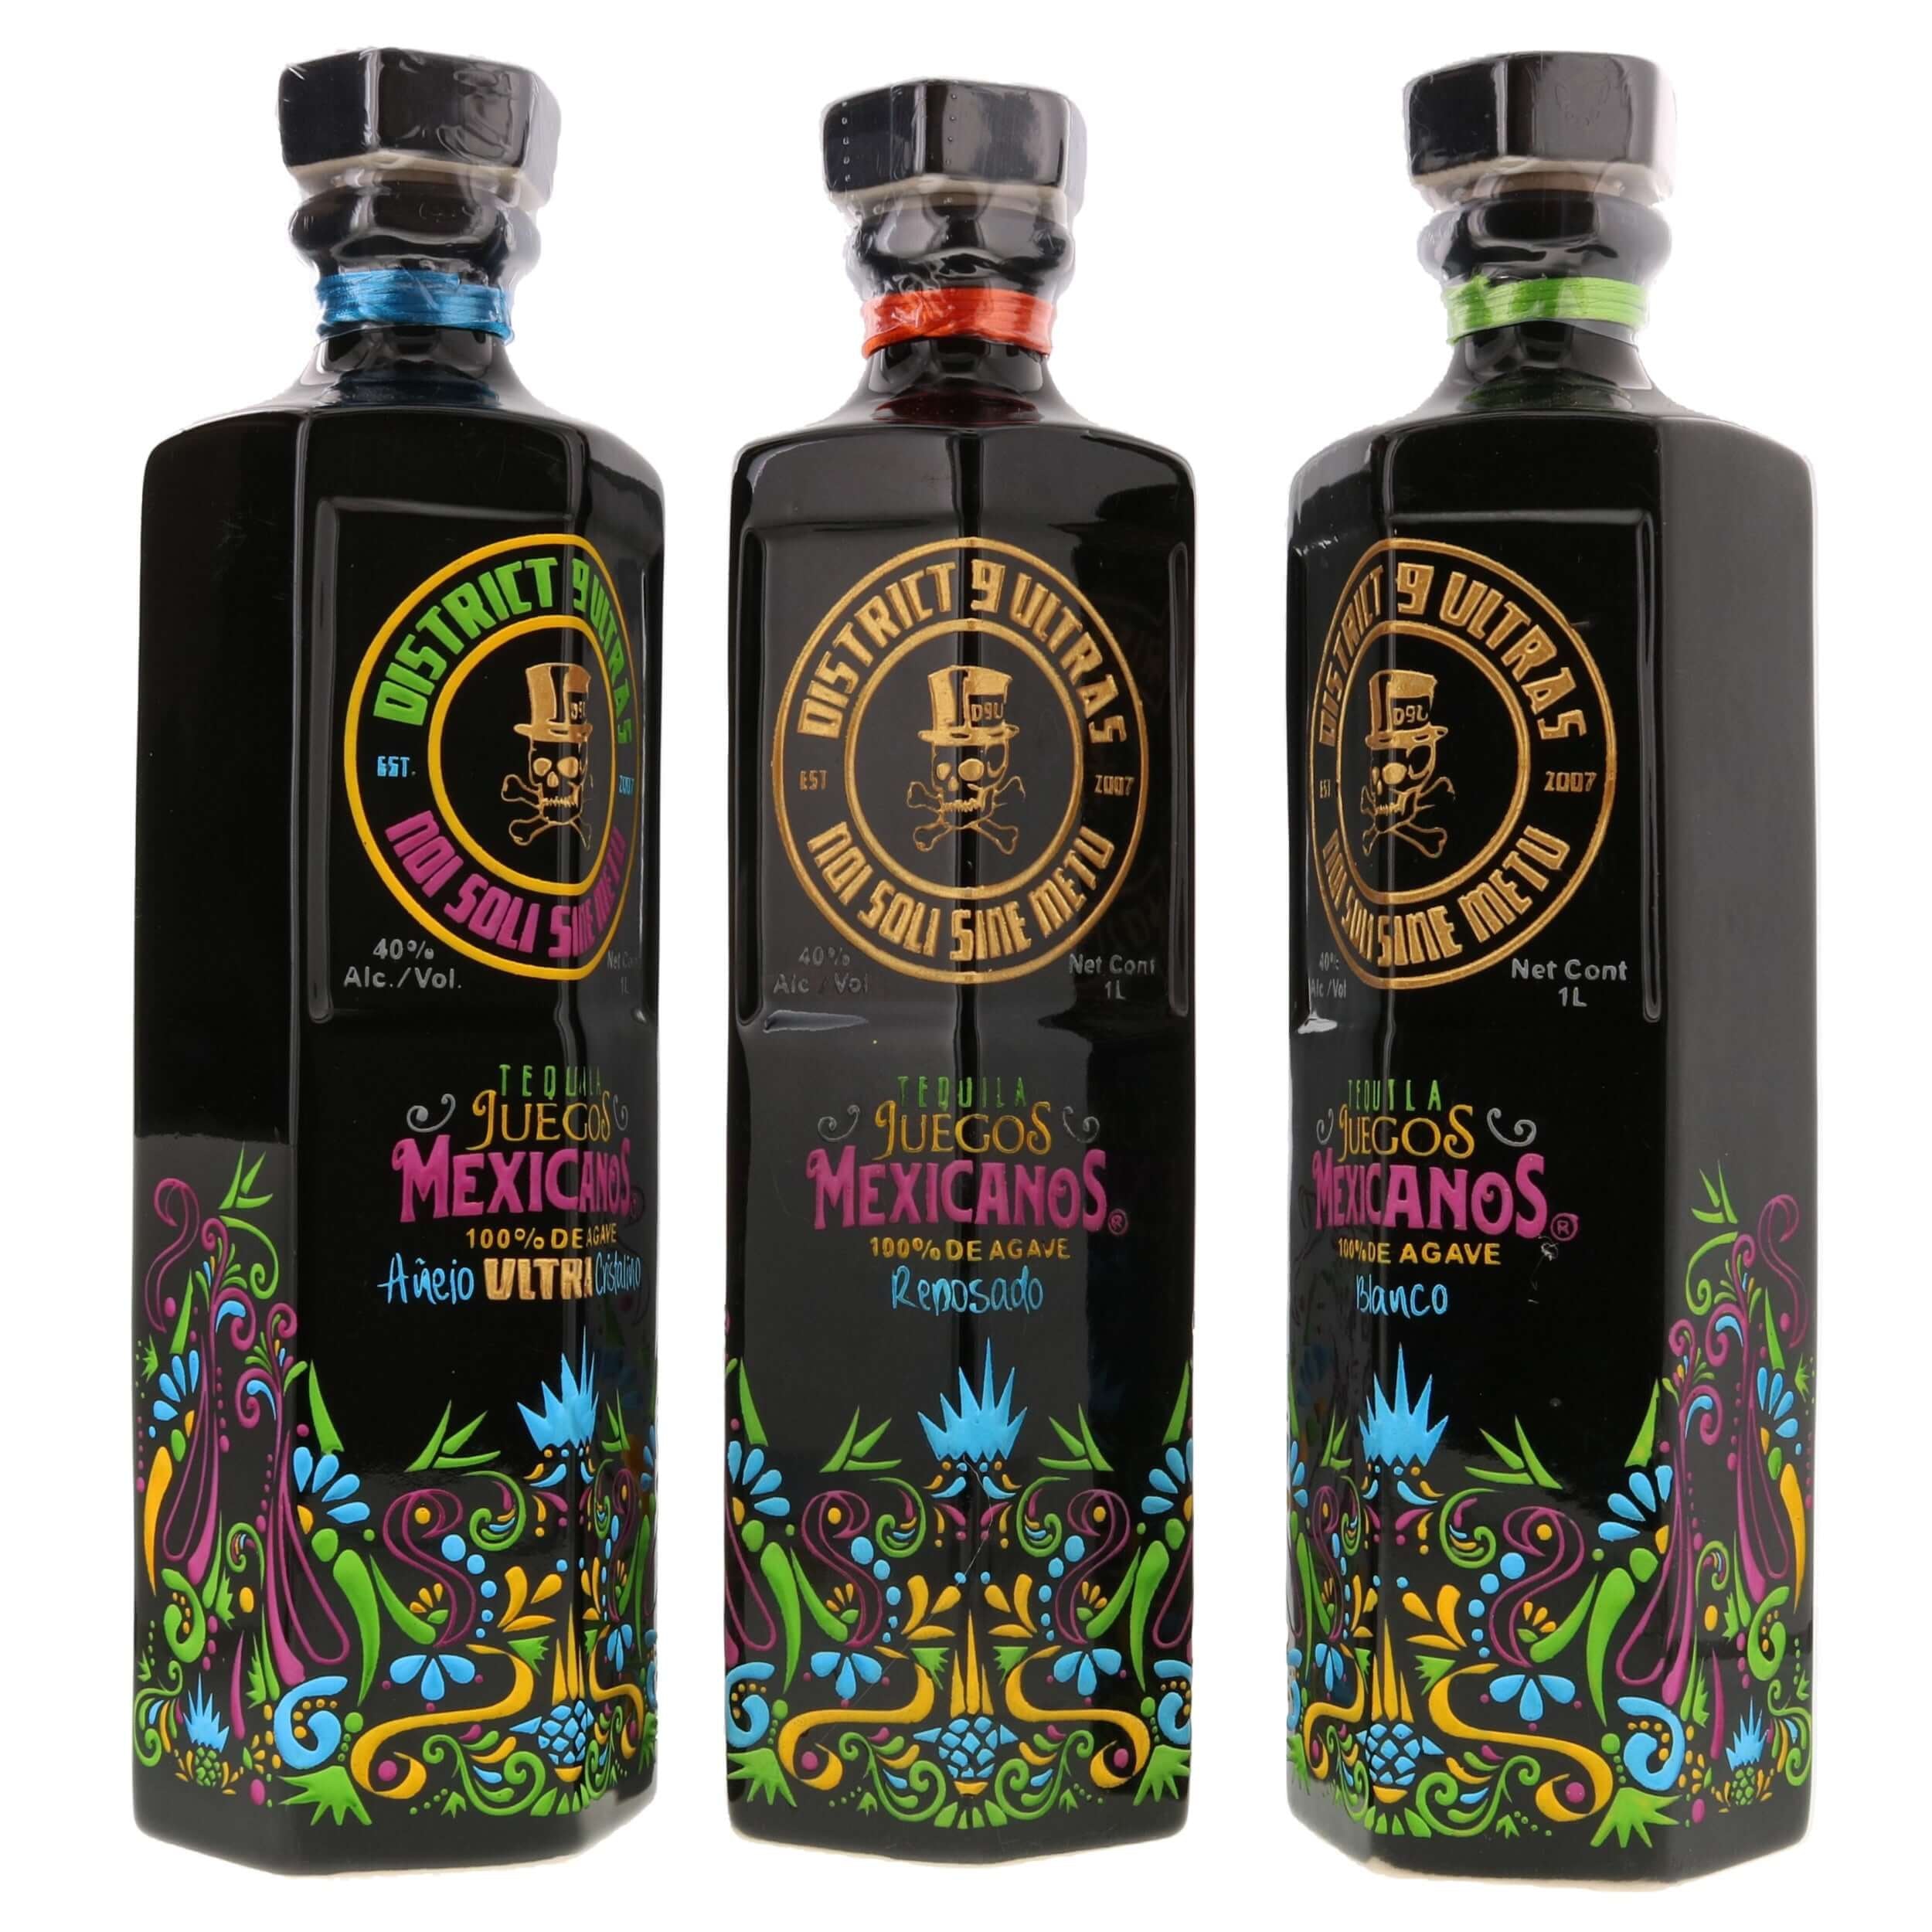 Juegos Mexicanos District 9 Ultras Exclusive Limited Edition Tequilas-Flask Fine Wine & Whisky Online